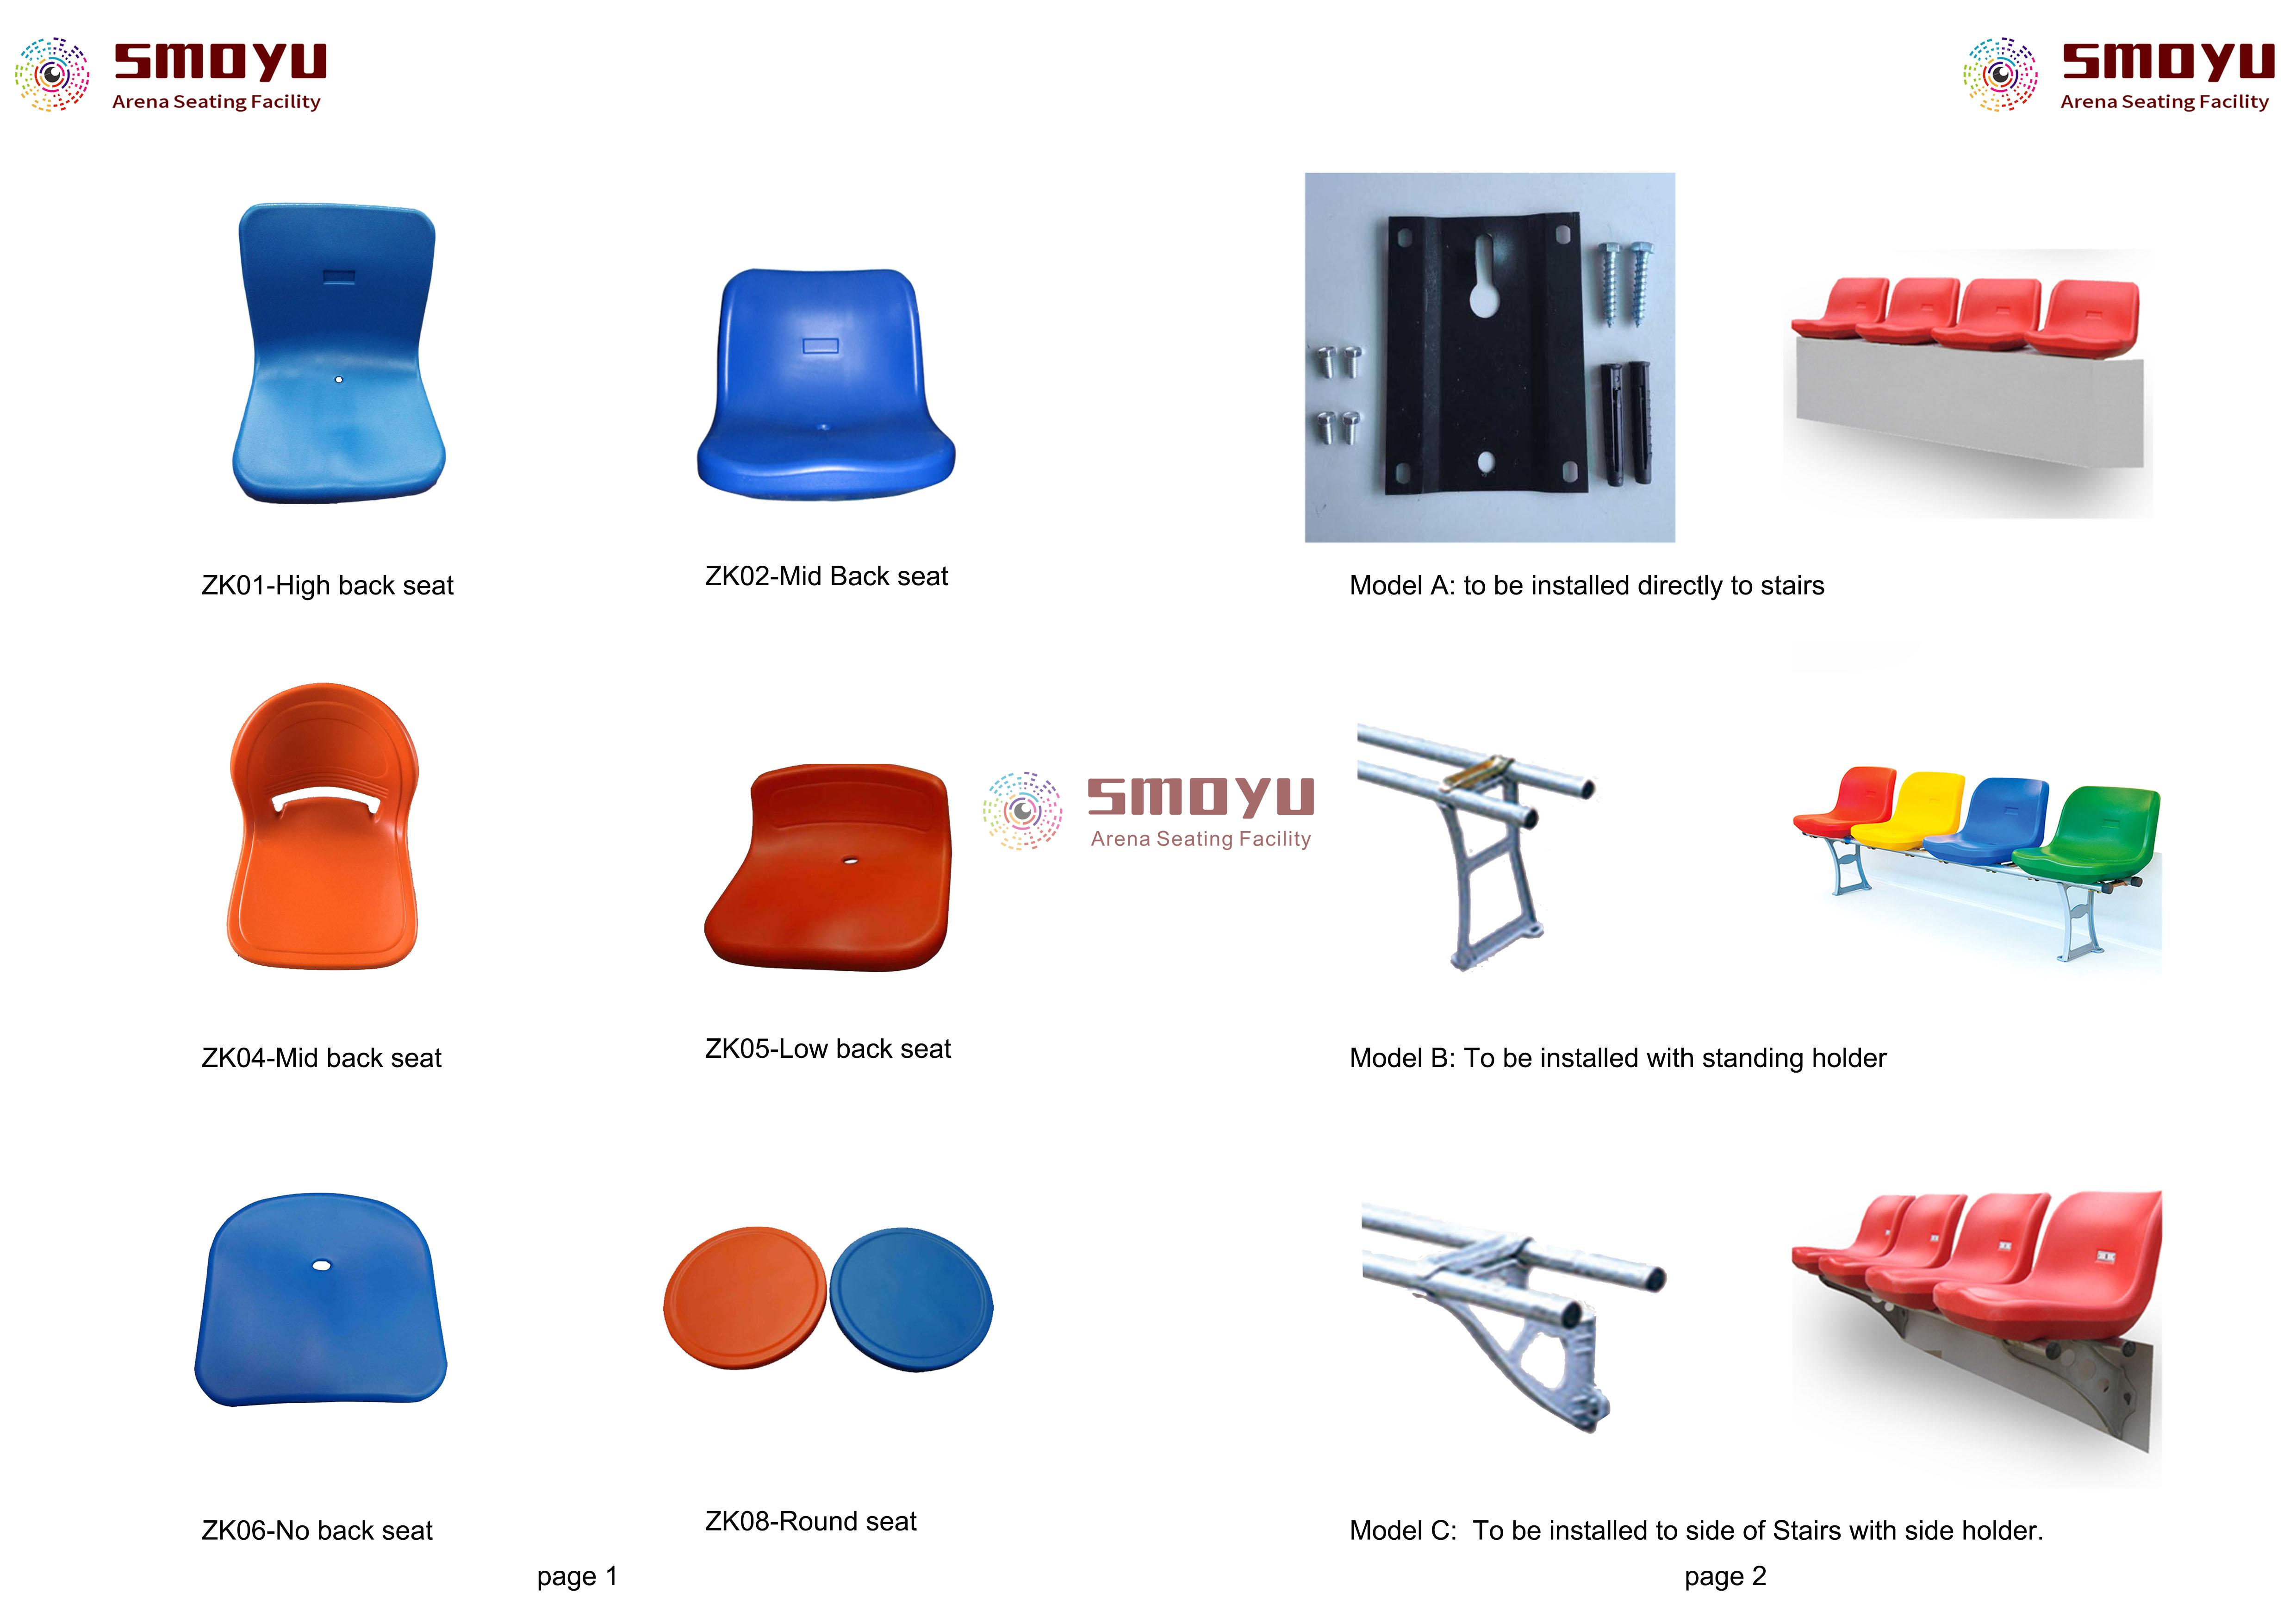 arena seating plastic chairs HDPE <a href=https://www.arena-seating.com/High-Back-rest-plastic-HDPE-material-stadium-seat-p.html target='_blank'>stadium seat</a>